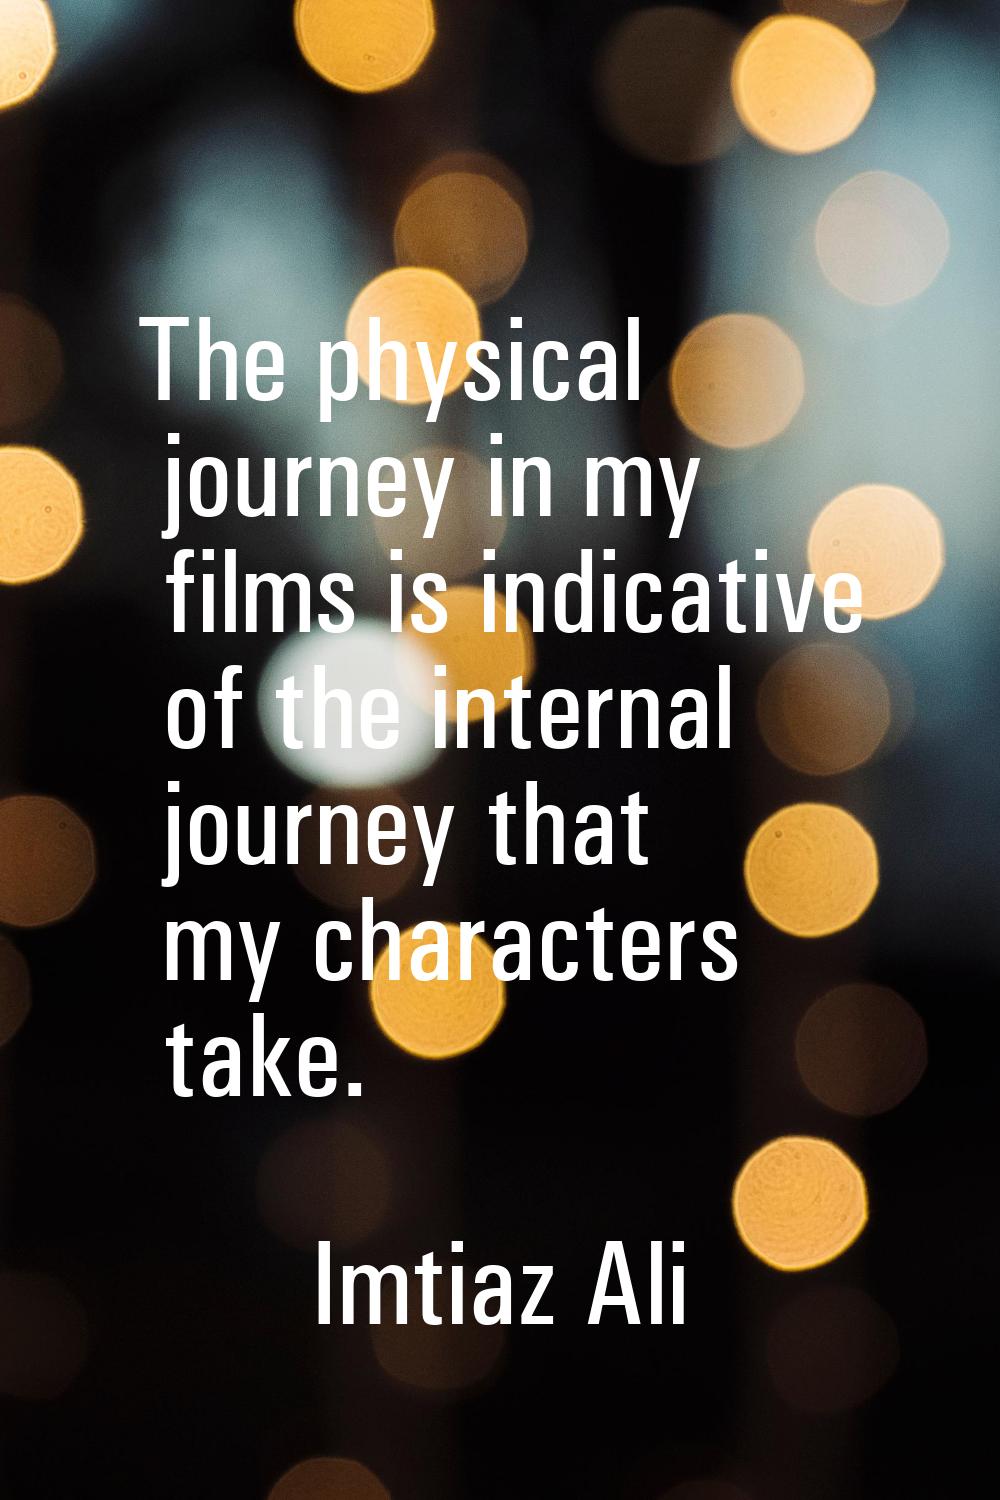 The physical journey in my films is indicative of the internal journey that my characters take.